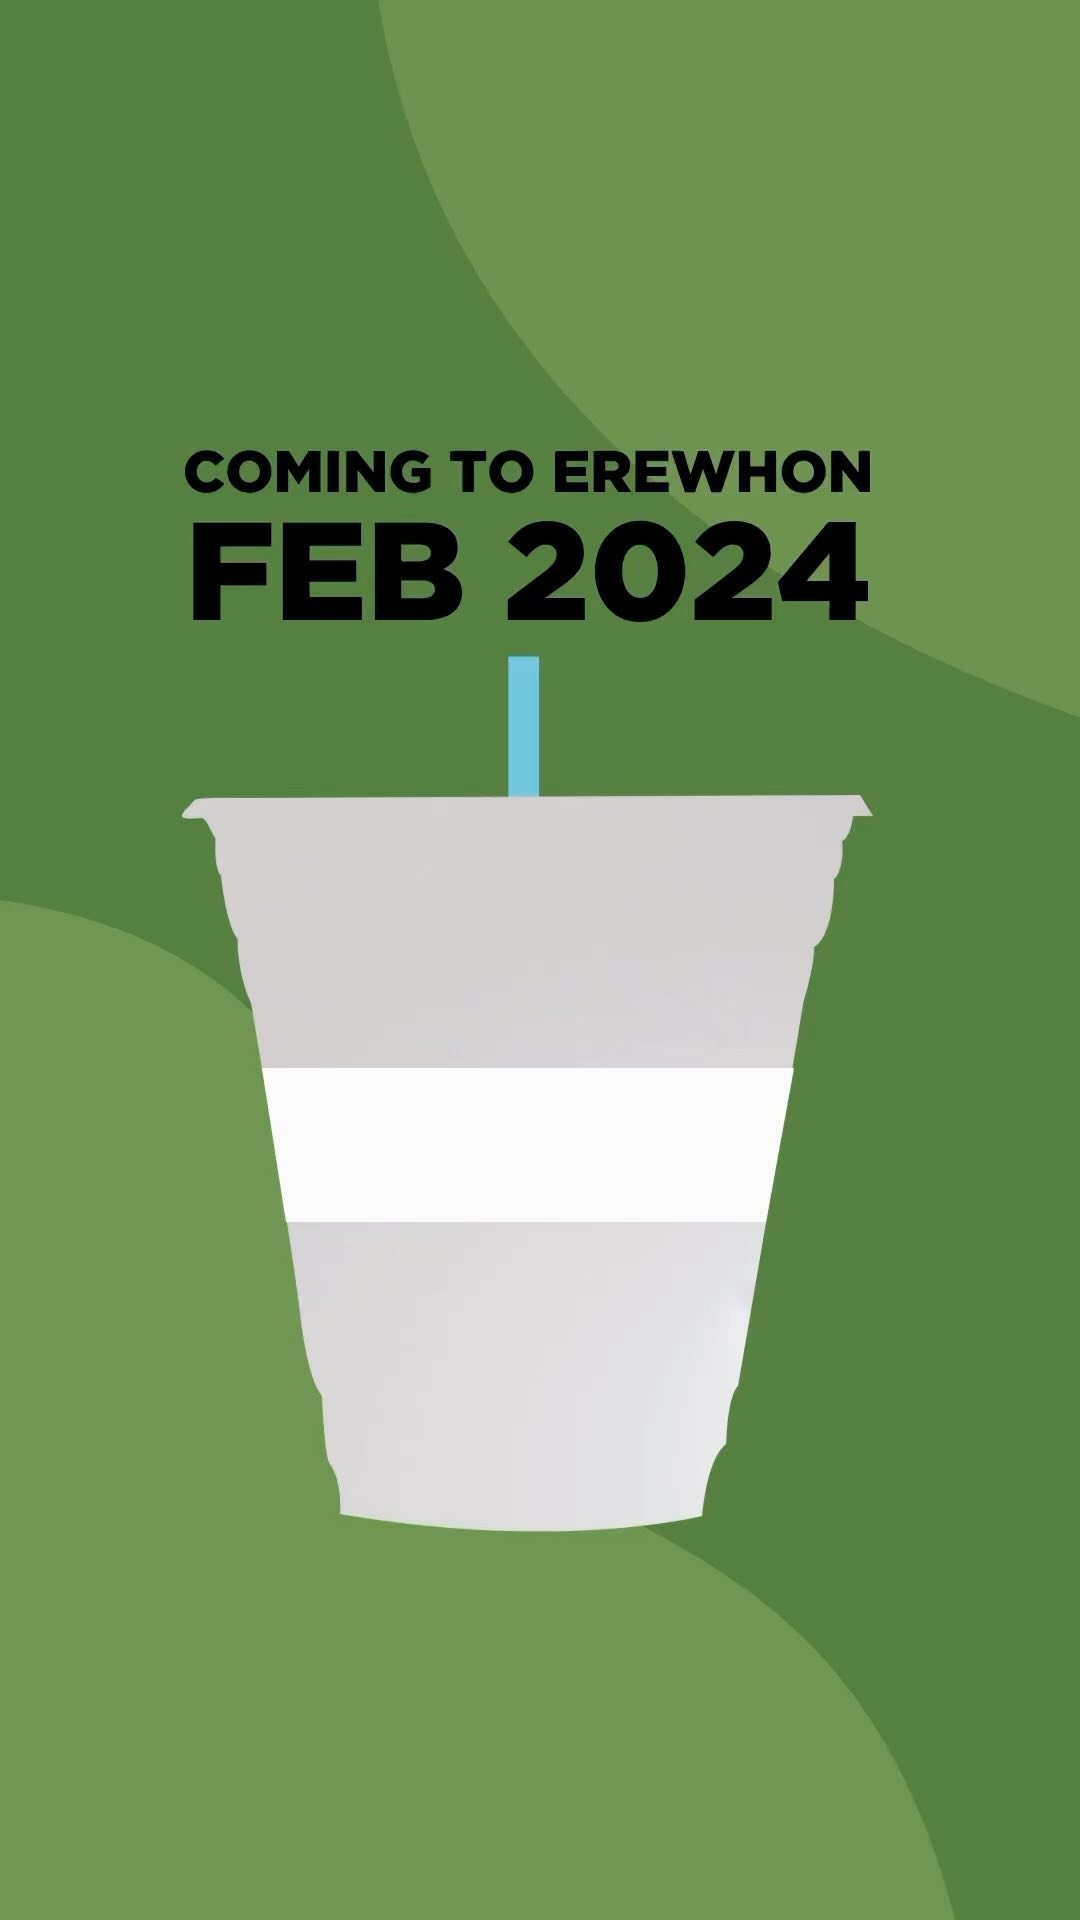 Surprise! We have an exciting membership smoothie collaboration coming to @erewhonmarket on February 1st! 🥛🙌🏼

Can you guess the ingredients? Comment below!👇🏻

ONE lucky person will win $40 worth of Clover Cash! 🐄

In order to enter:
1. Like + save this post!
2. Must be following us at @clover.sonoma 
3. Drop your guesses in the comments below 👇🏻

Bonus entree: Like + comment on our last 3 posts! 🥳

No purchase is necessary to enter. Multiple entries are allowed. Giveaway ends 1/31/24, at 11:59 p.m. PST. @‌clover.sonoma will select the winner and contact them via DM. Open to CA residents only. By entering, entrants confirm they are 18+ years of age. We will NOT request any credit card information or create a page for you to follow in regards to winning the prize. One winner will be randomly selected and notified via DM. This giveaway is not sponsored, endorsed, or administered by or associated with Instagram. 

Good luck!